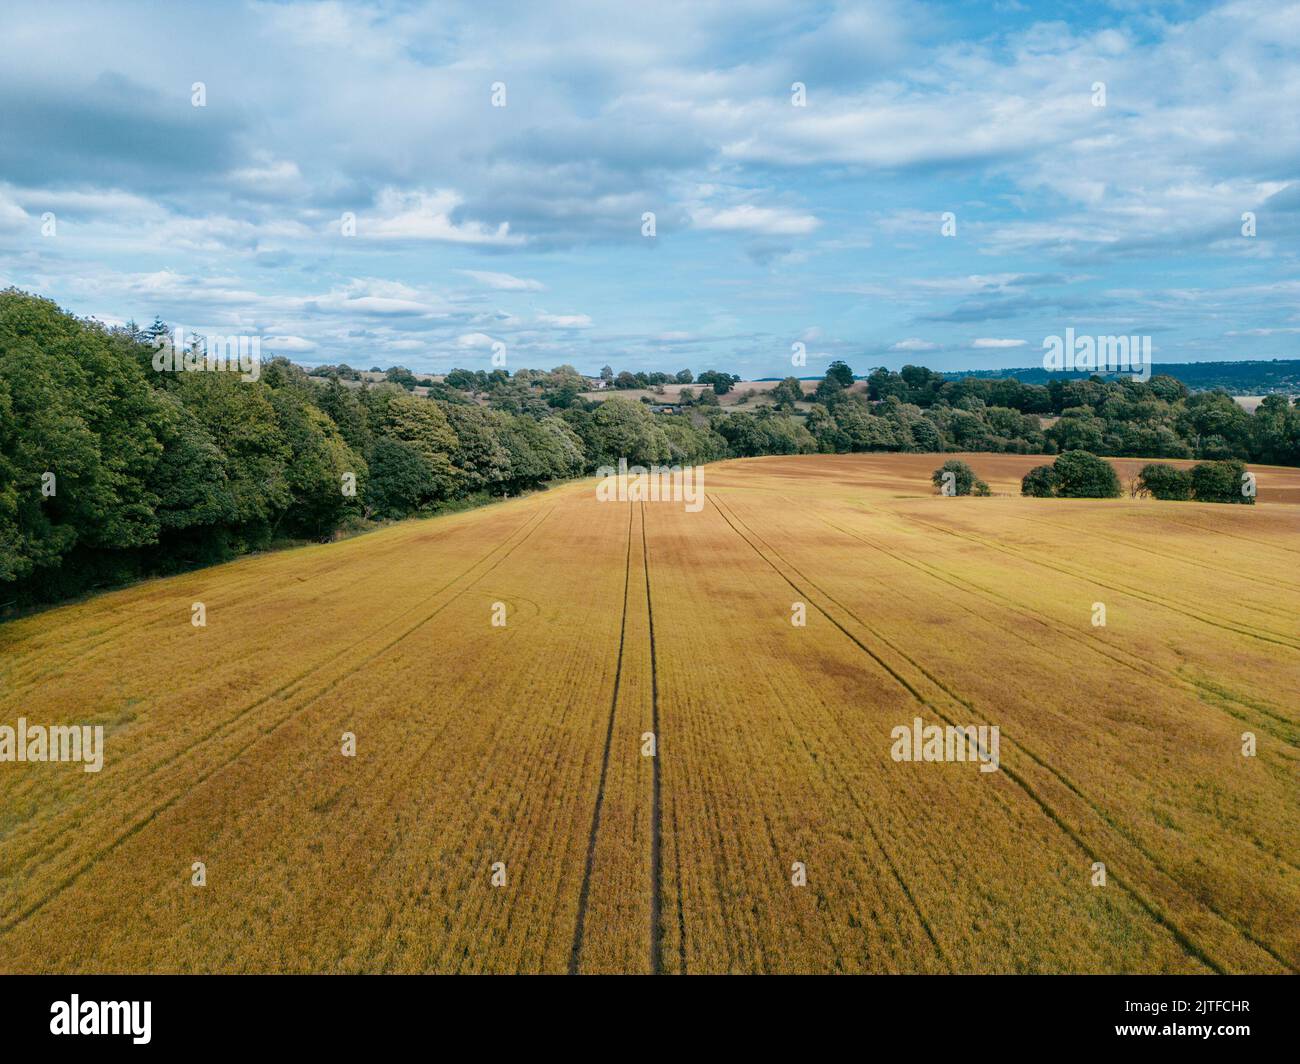 Aerial view of agricultural crop farming. Landscape of wheat field with blue sky. Stock Photo